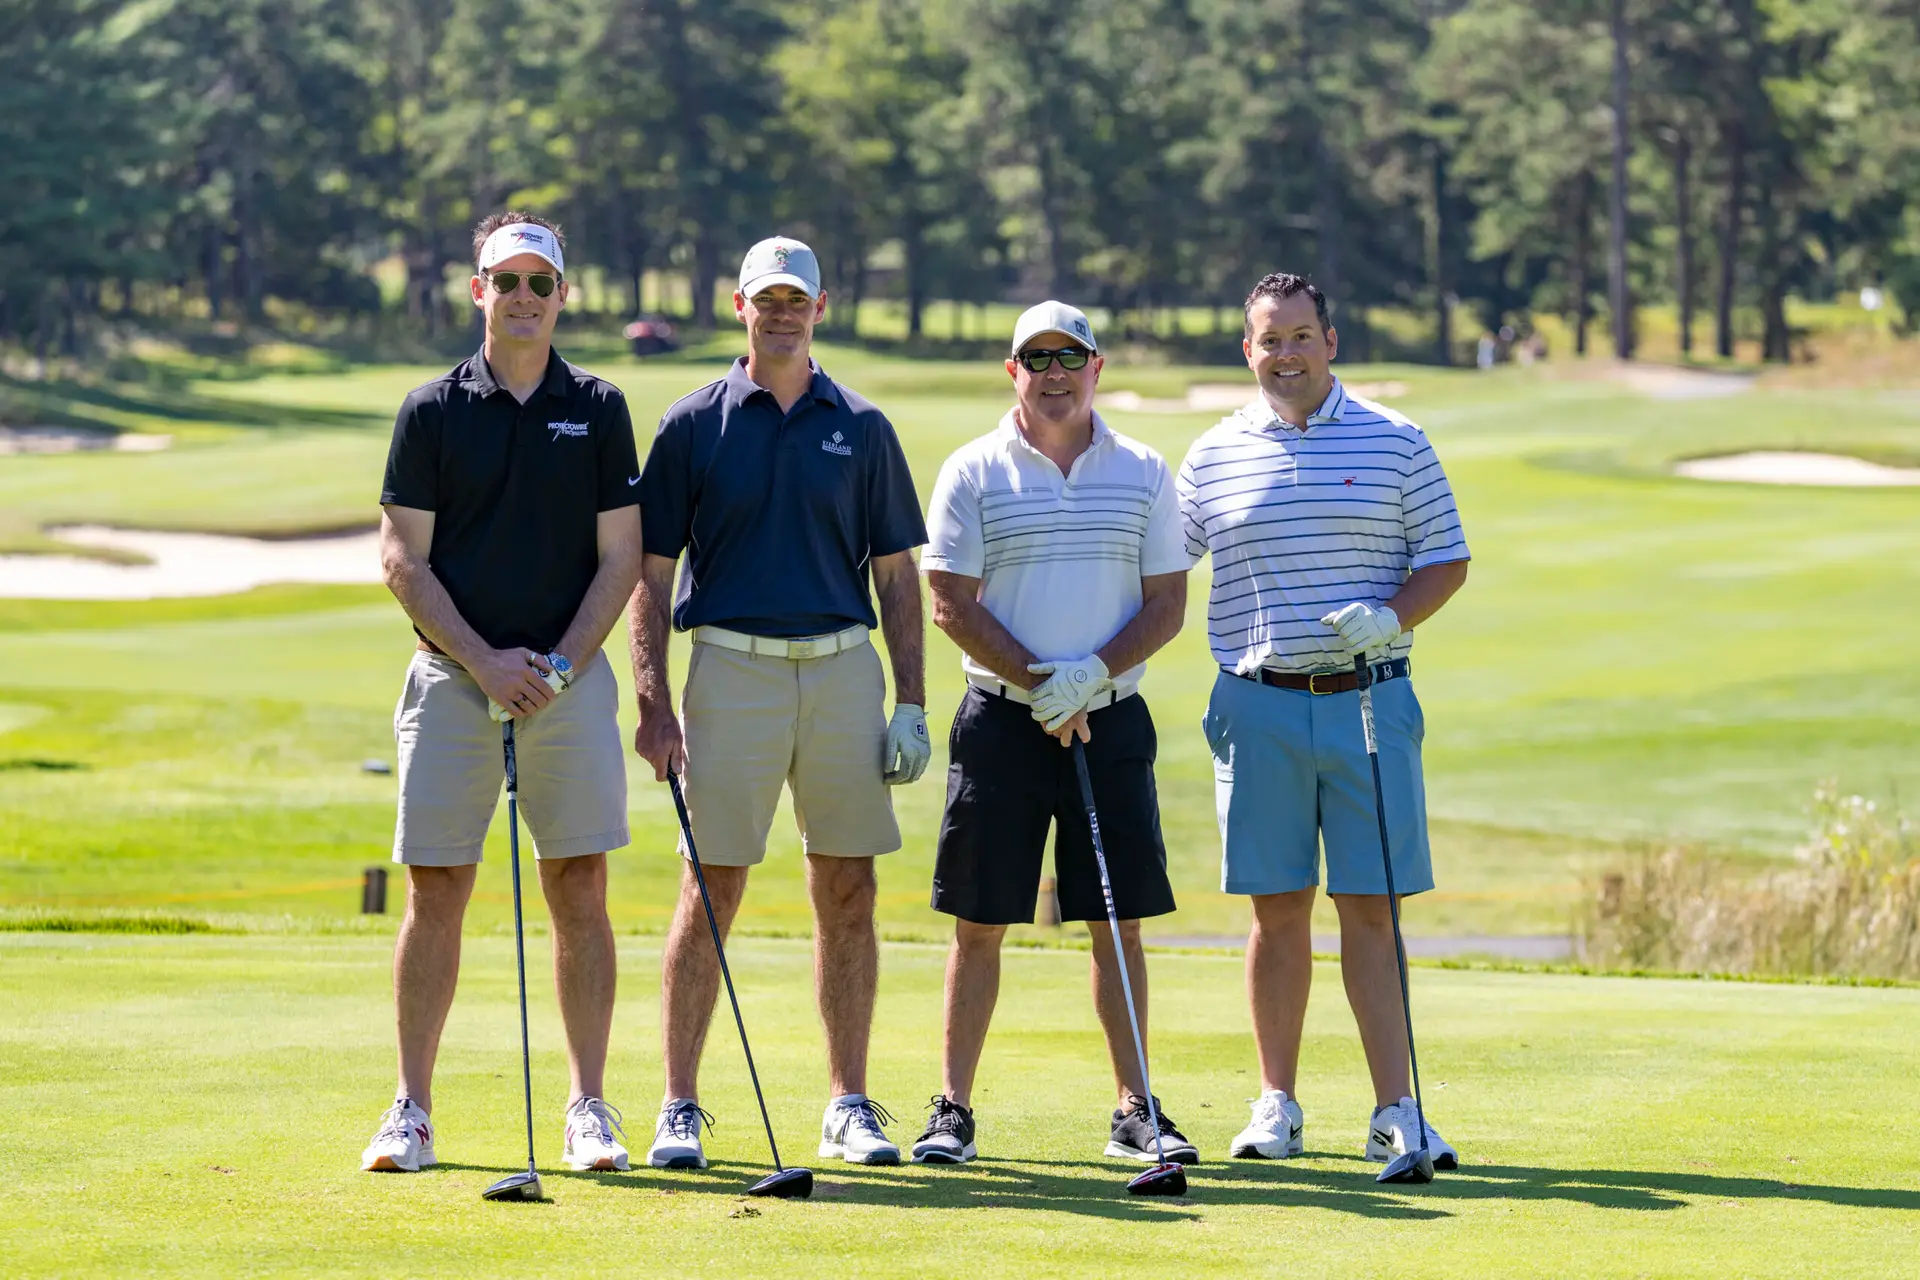 11th Annual Protectowire Golf Open